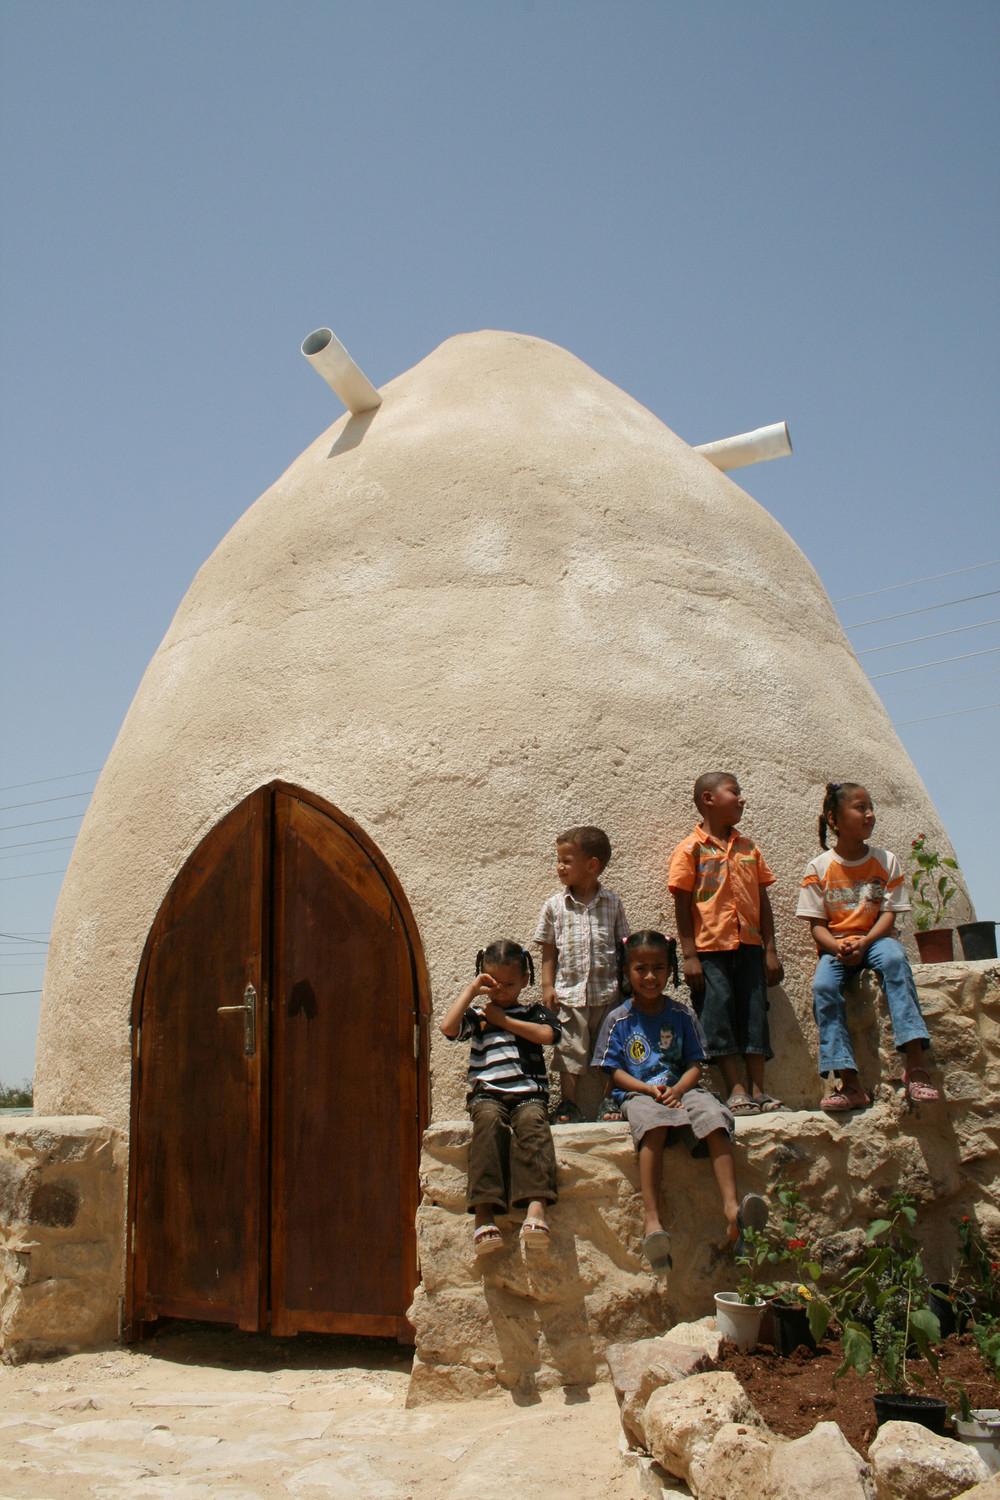 Earthbag dome and local children